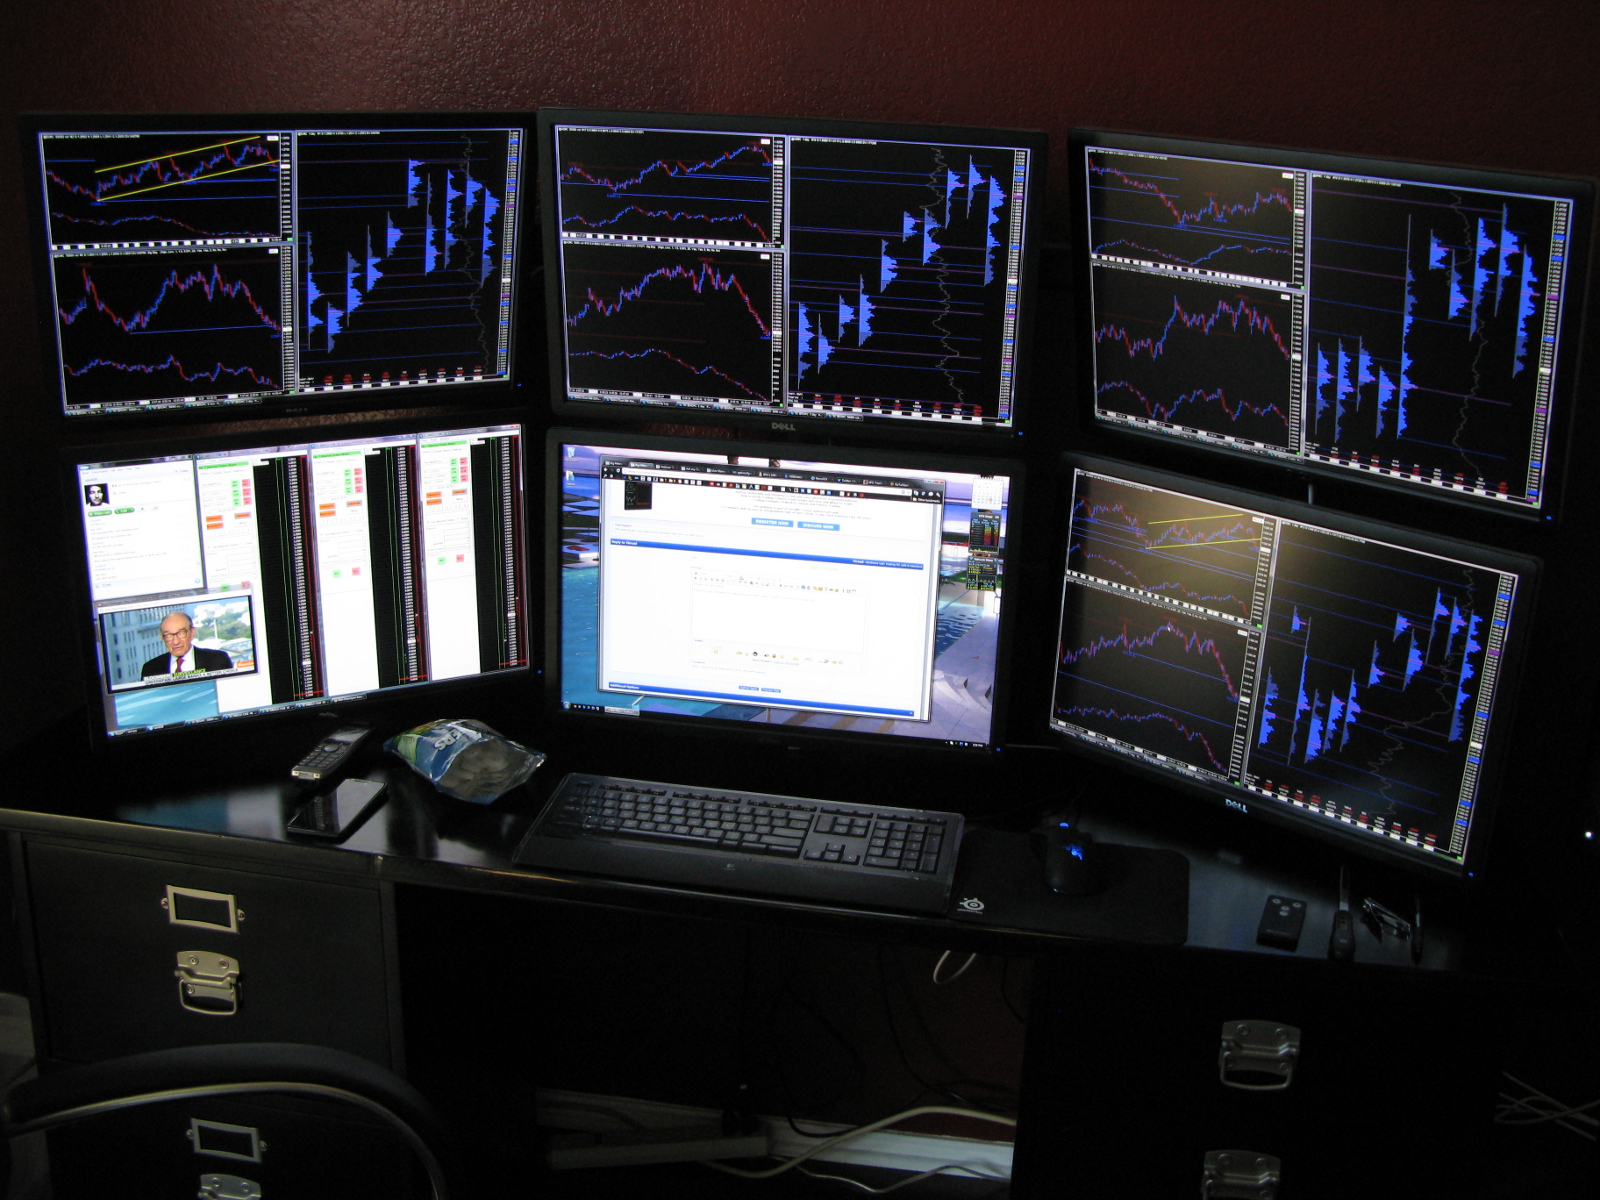 Hardware lust: trading PC with 6-monitors - futures io